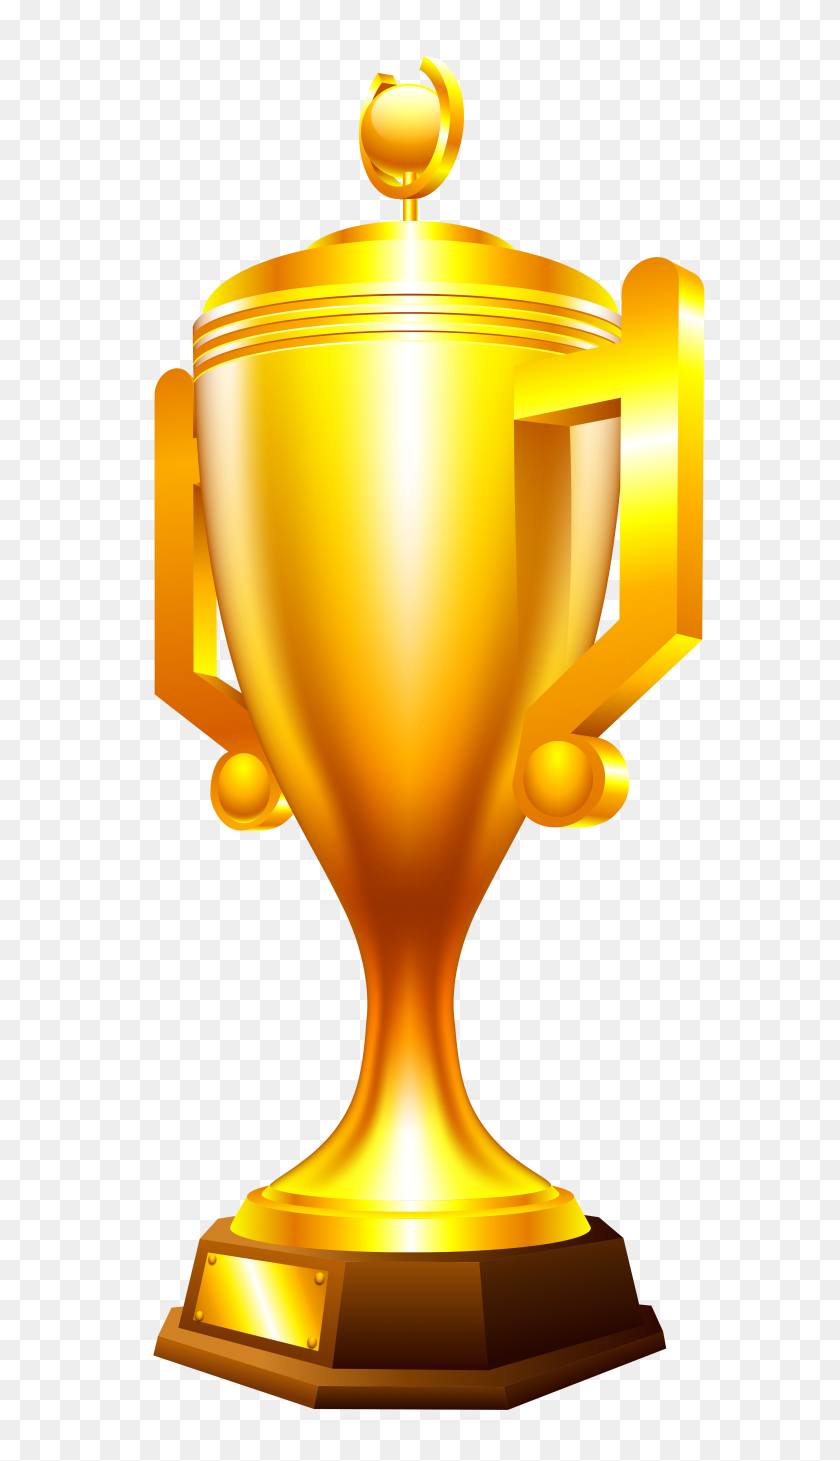 2879x5174 Gold Cup Trophy Png Image - Trophy PNG